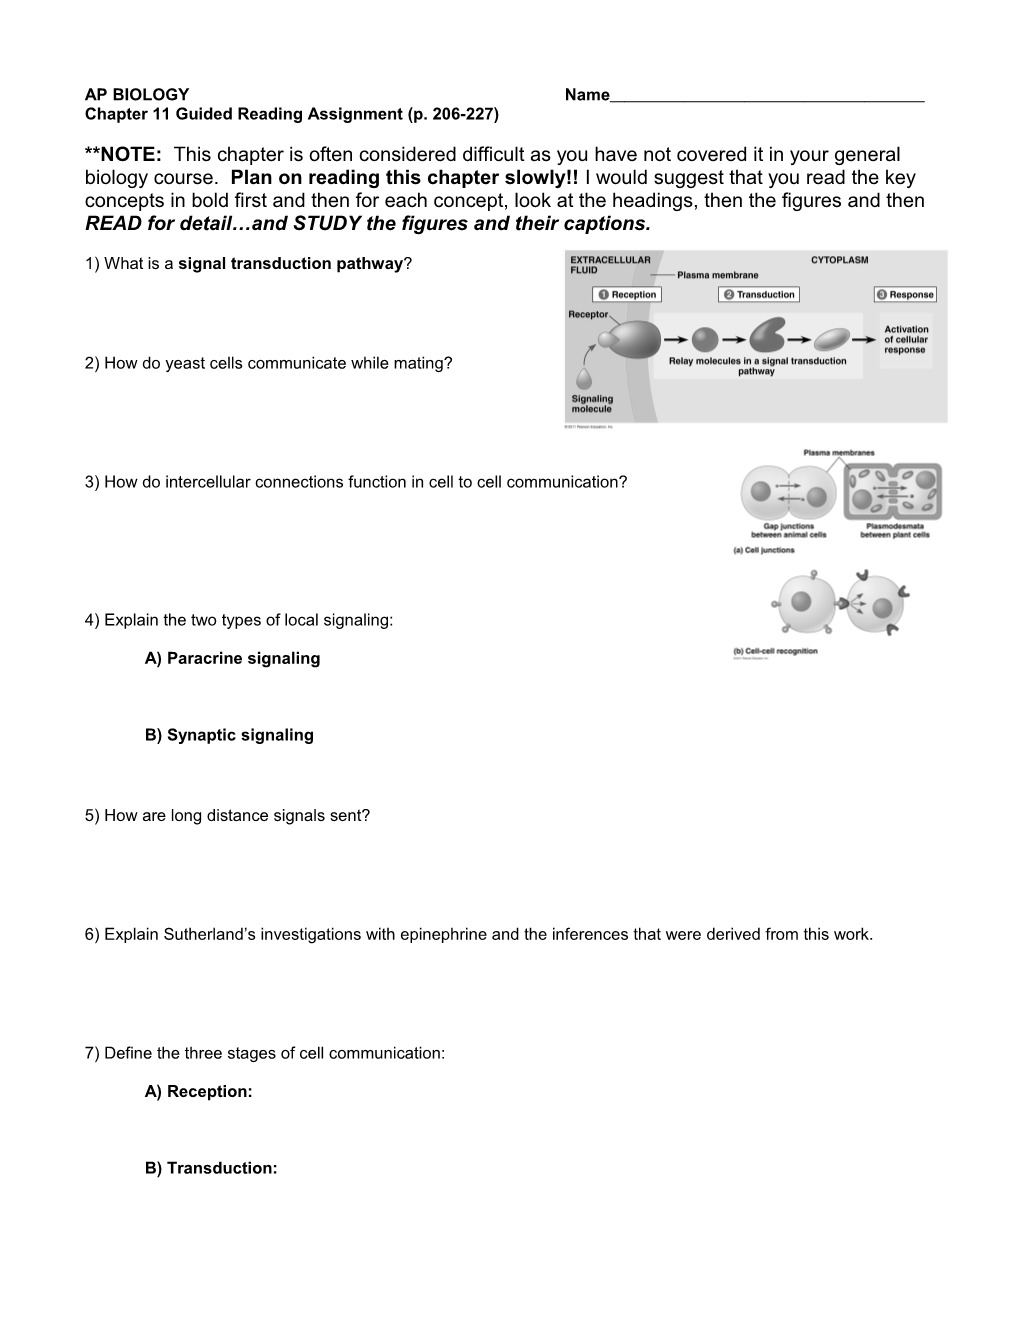 Chapter 11 Guided Reading Assignment (P. 206-227)